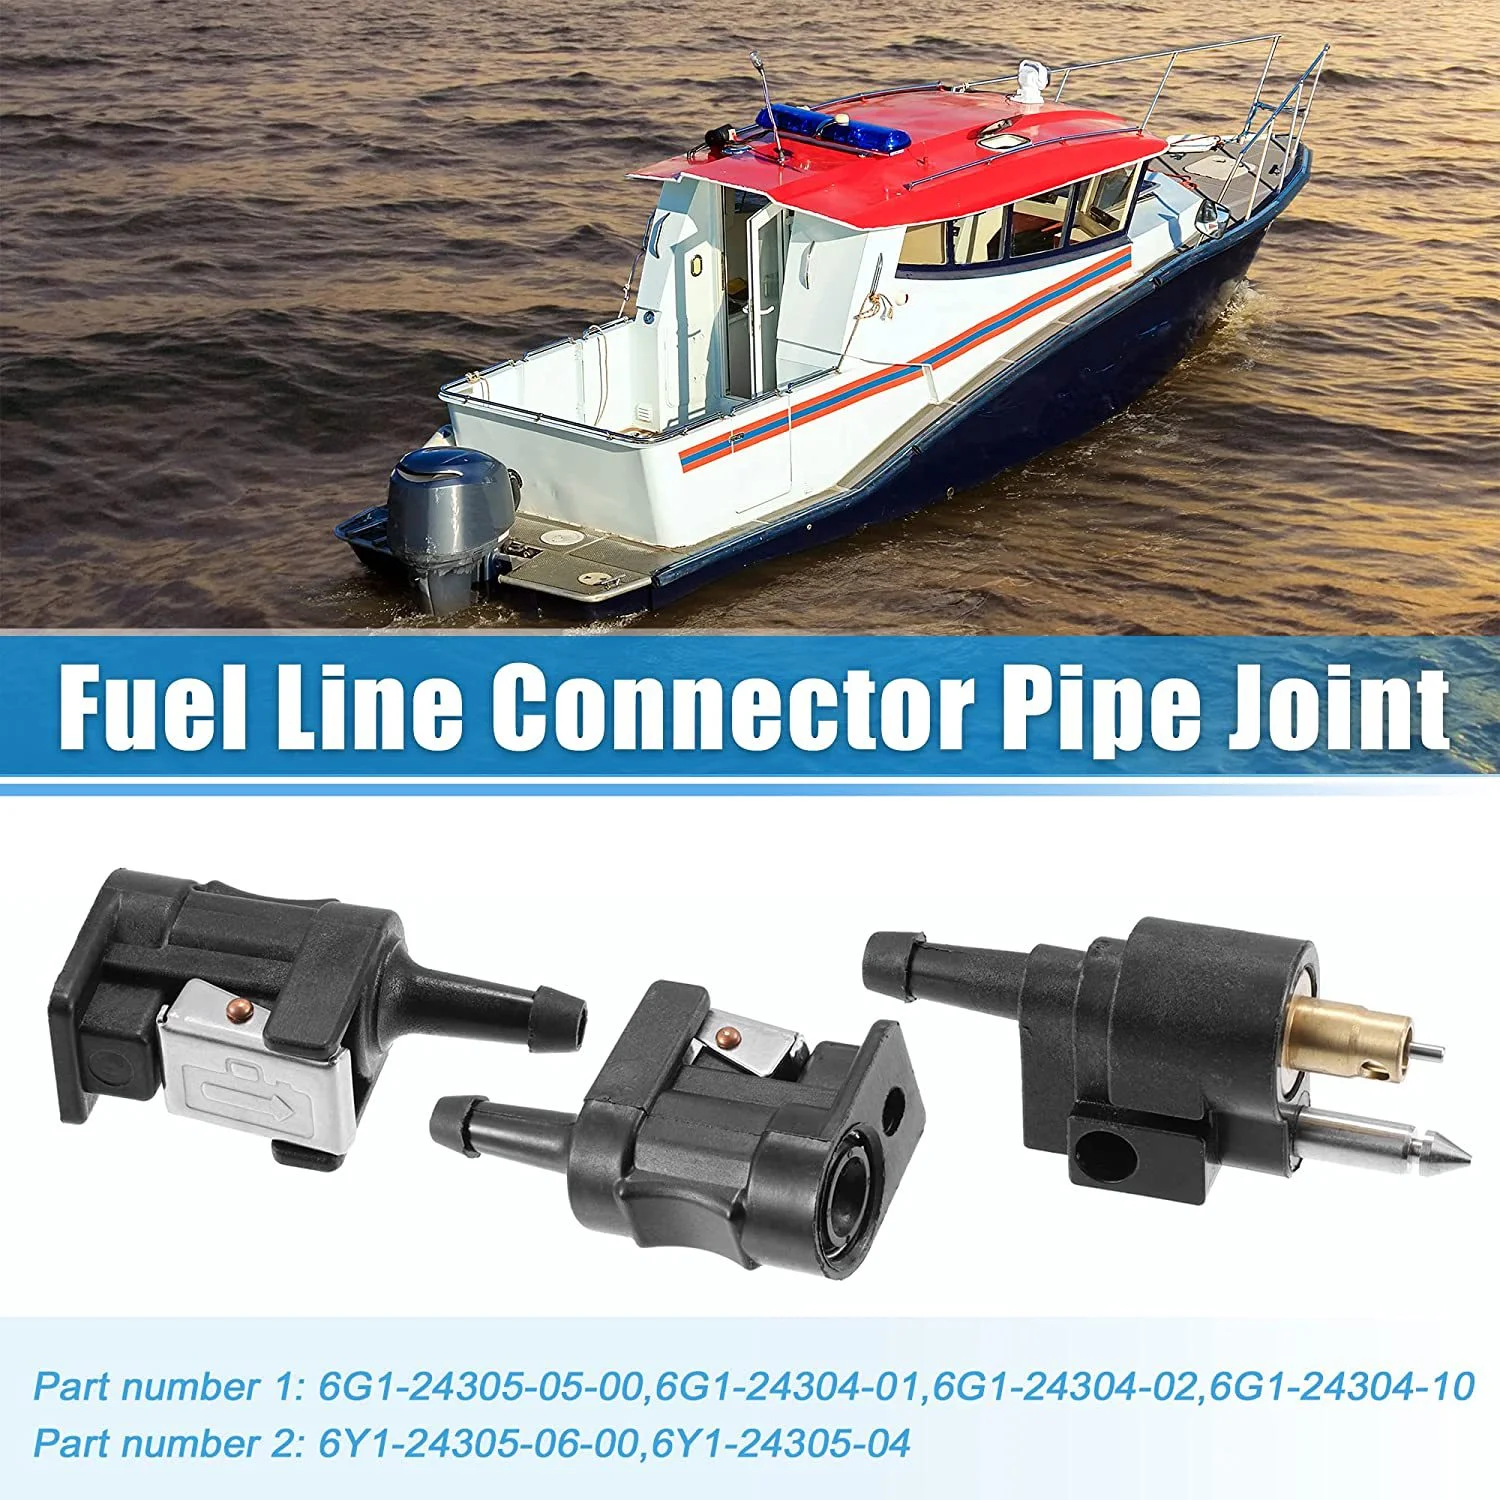 Marine Outboard Oil Tank Fuel Line Male/ Female Sockets Quick Coupling Yachts/Fishing Boats/Fast Boats/Cruise Ships Accessories knitted cardigan vest coat tank comfortable top daily v neck holiday vacation loose vintage m 3xl male brand new